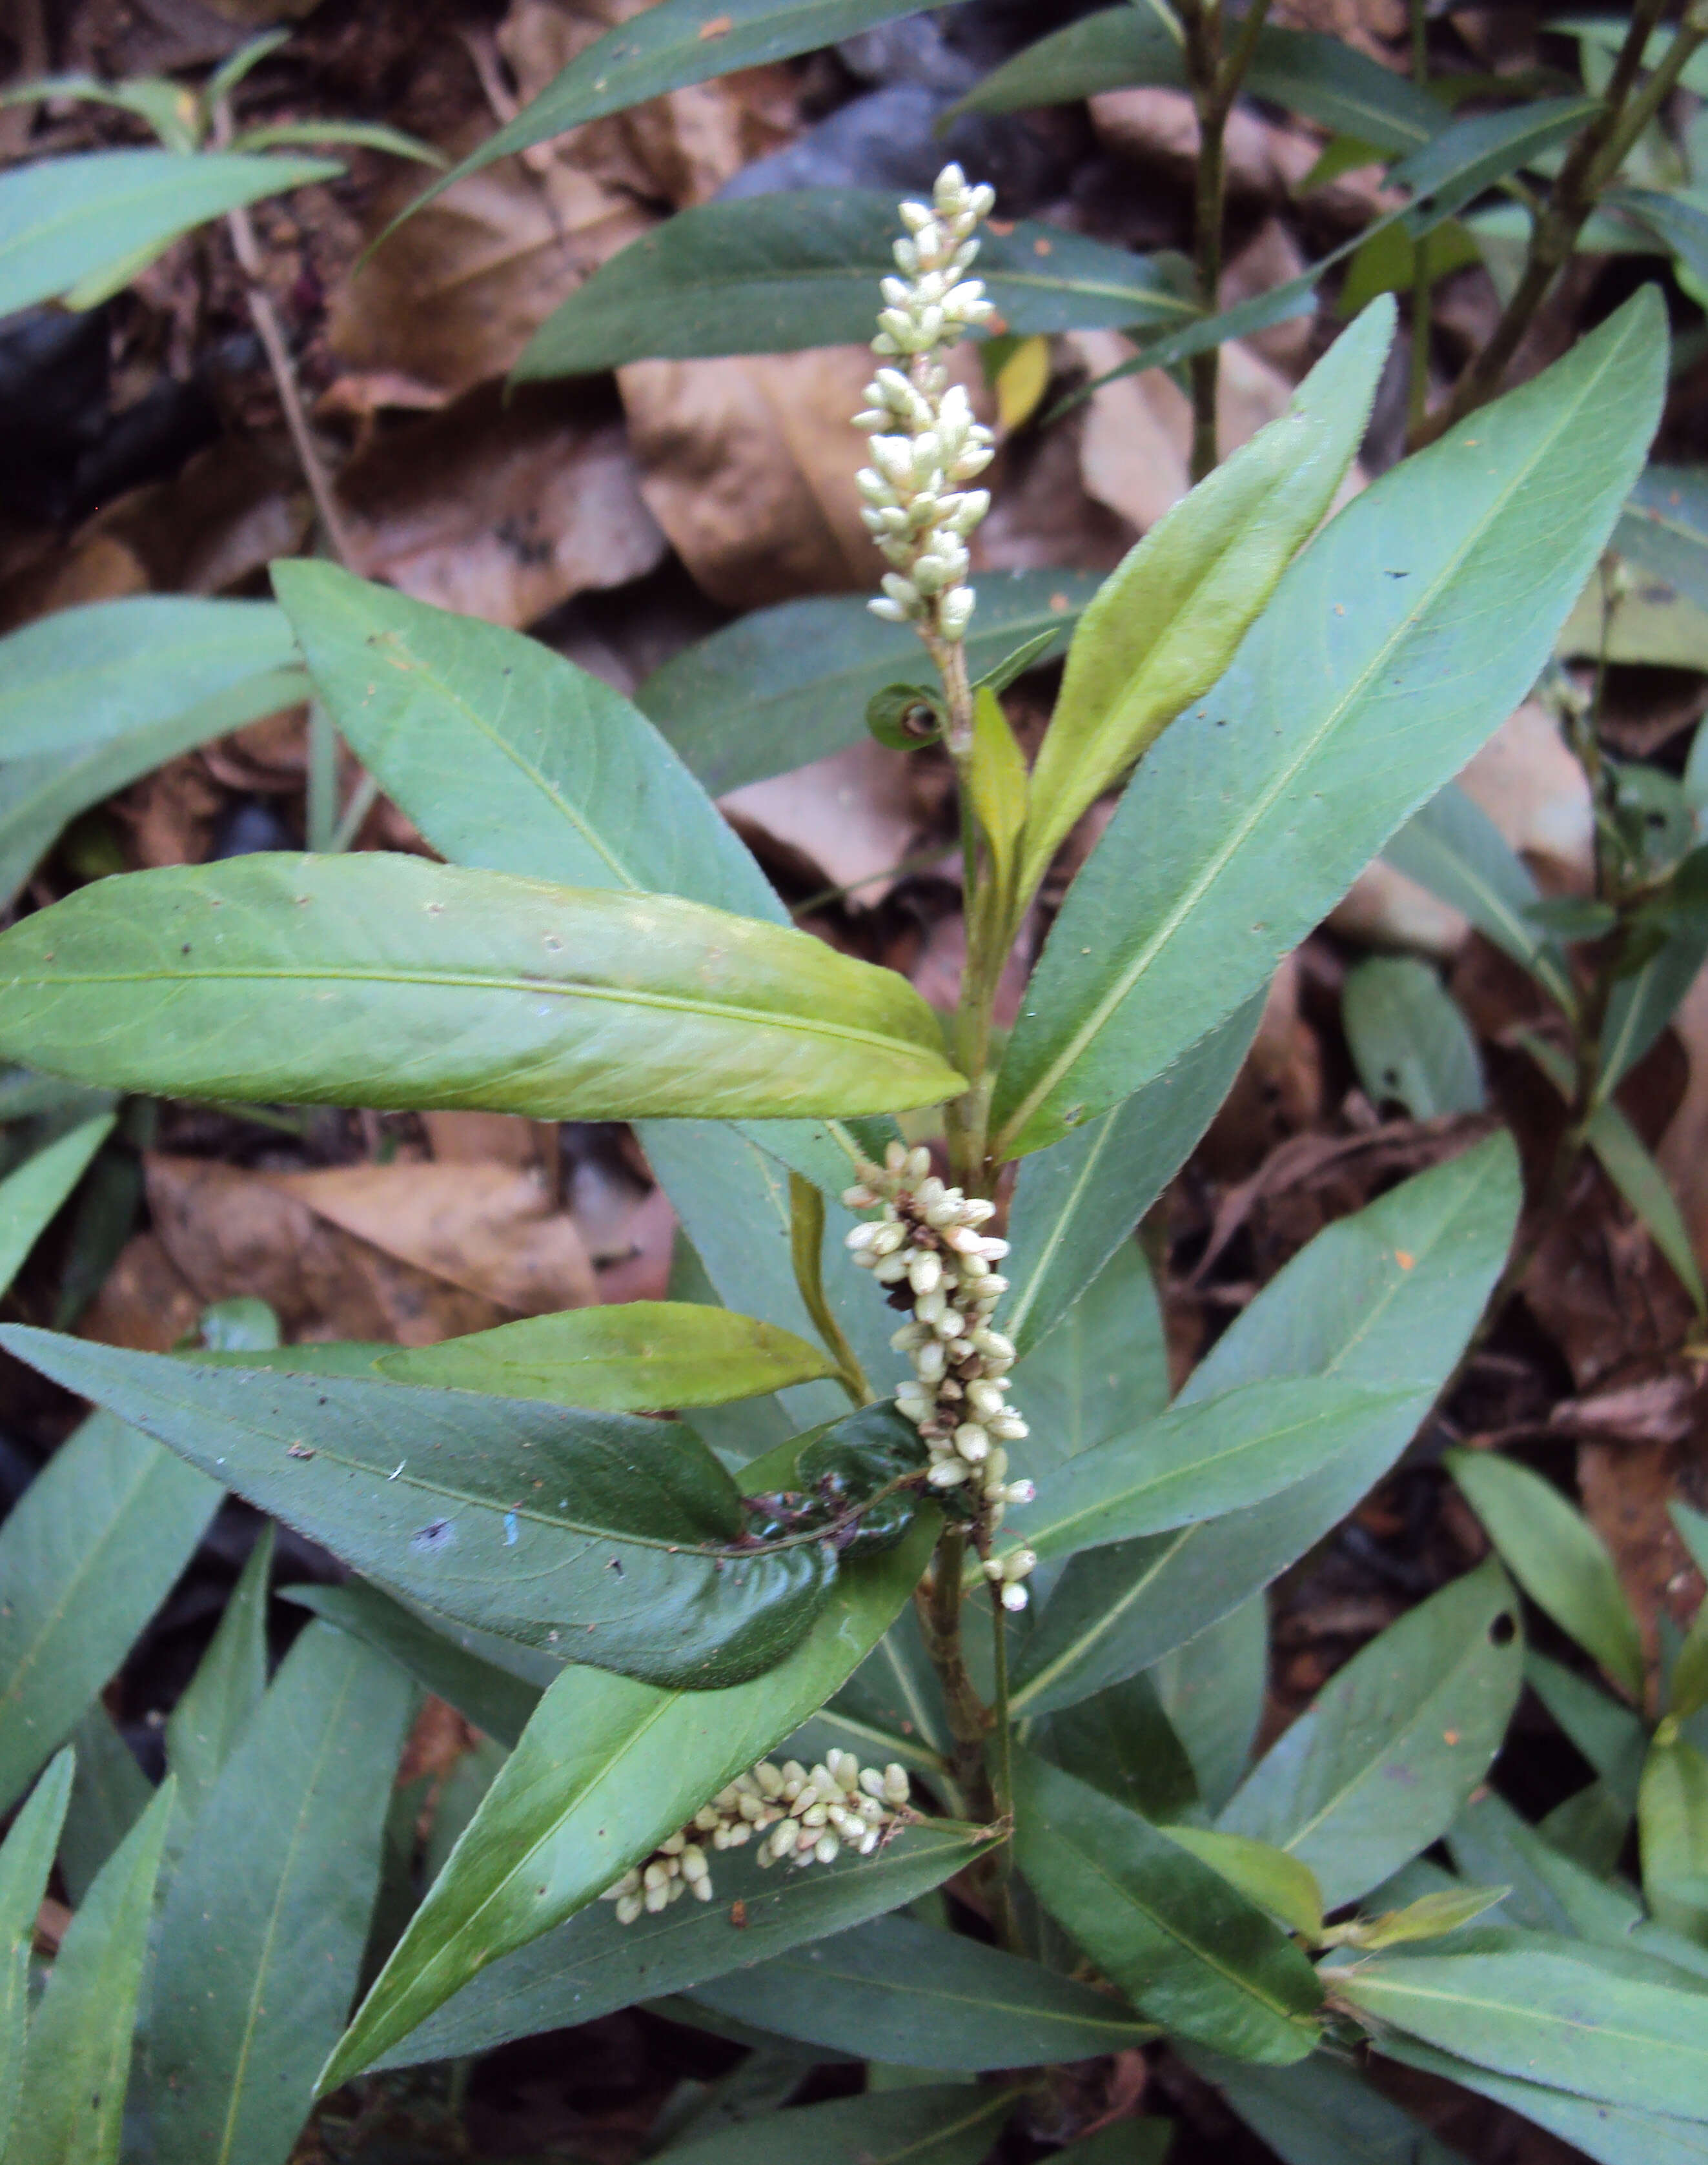 Image of Smooth Smartweed